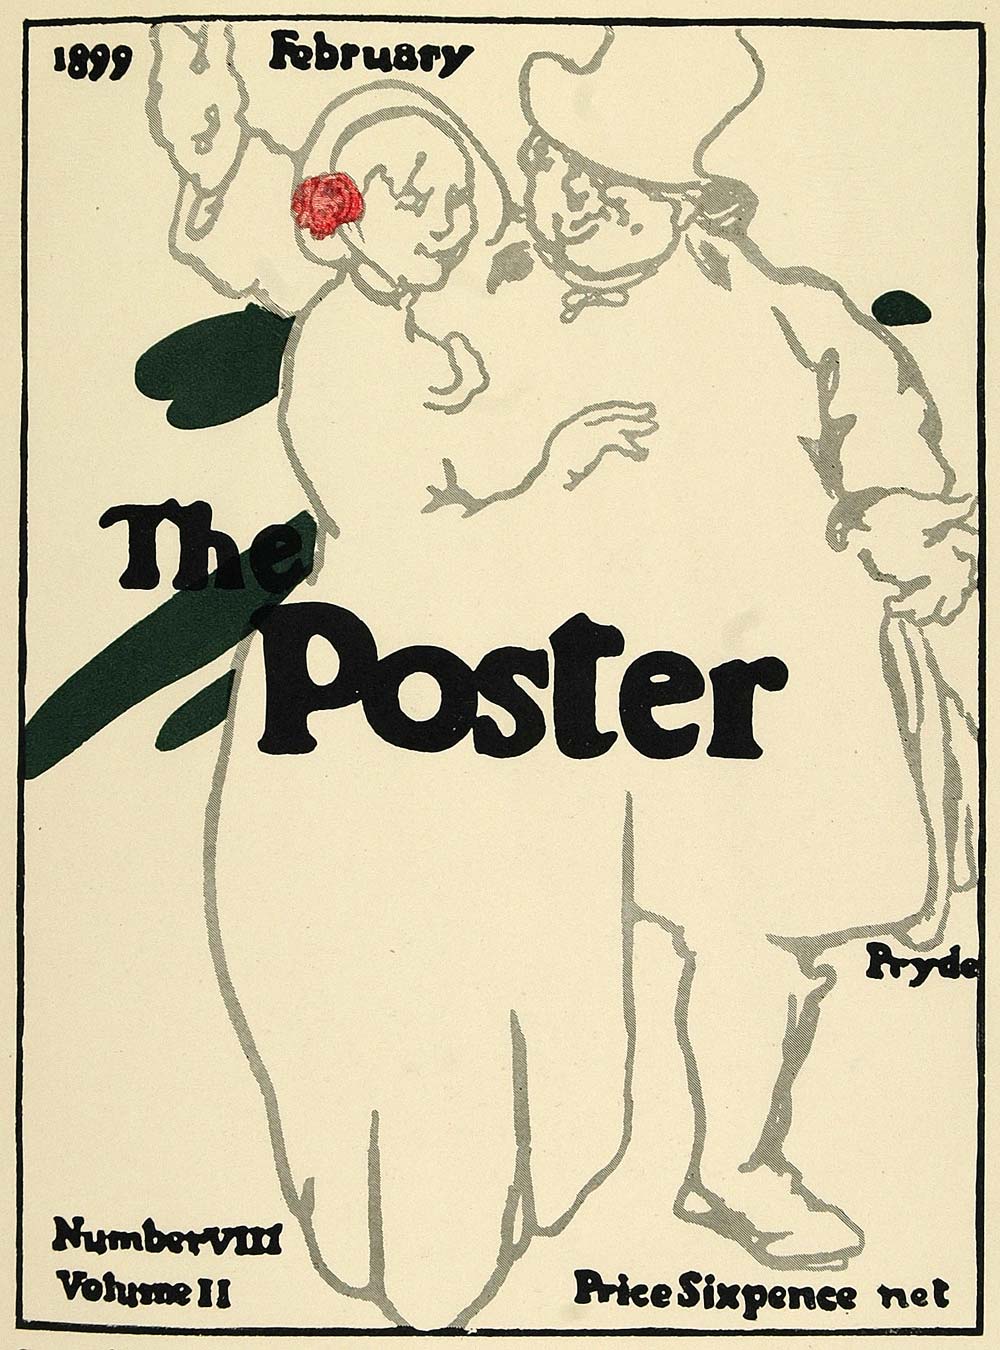 1924 Lithograph James Pryde Mini Poster Art The Poster Cover February 1899